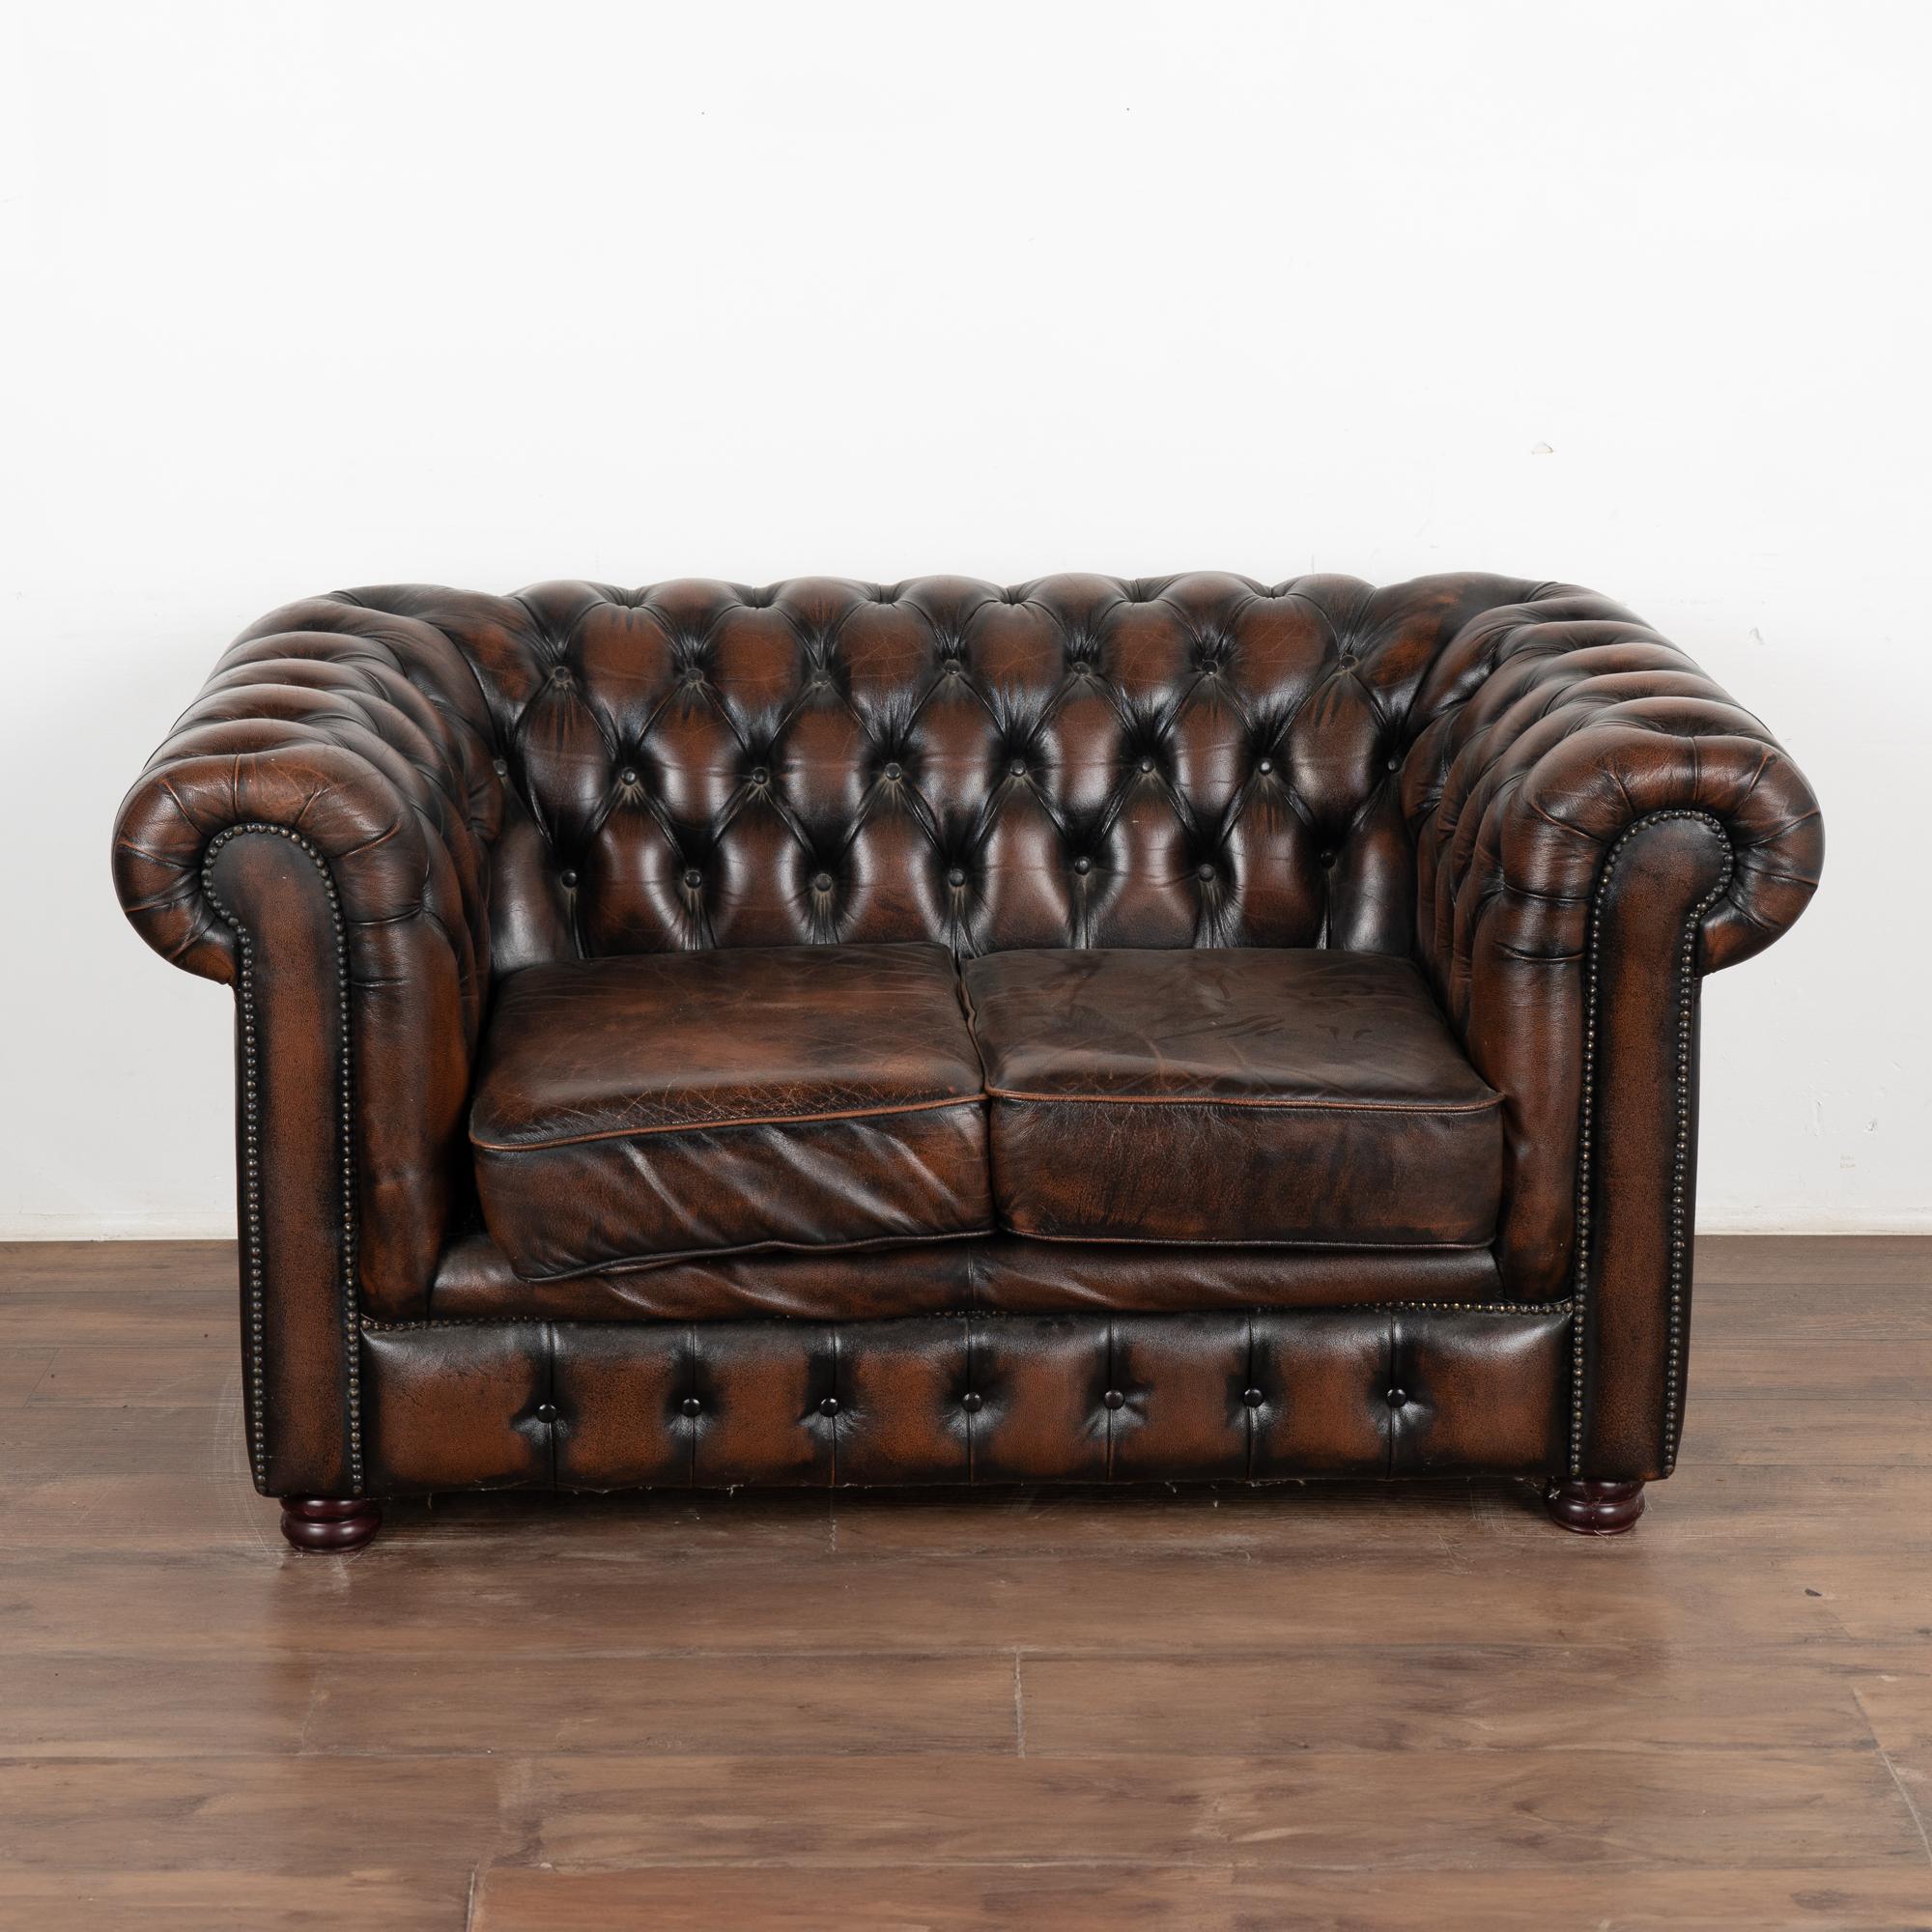 Vintage Brown Leather Chesterfield 3 Seat and 2 Seat Sofa Set, circa 1970-80 1